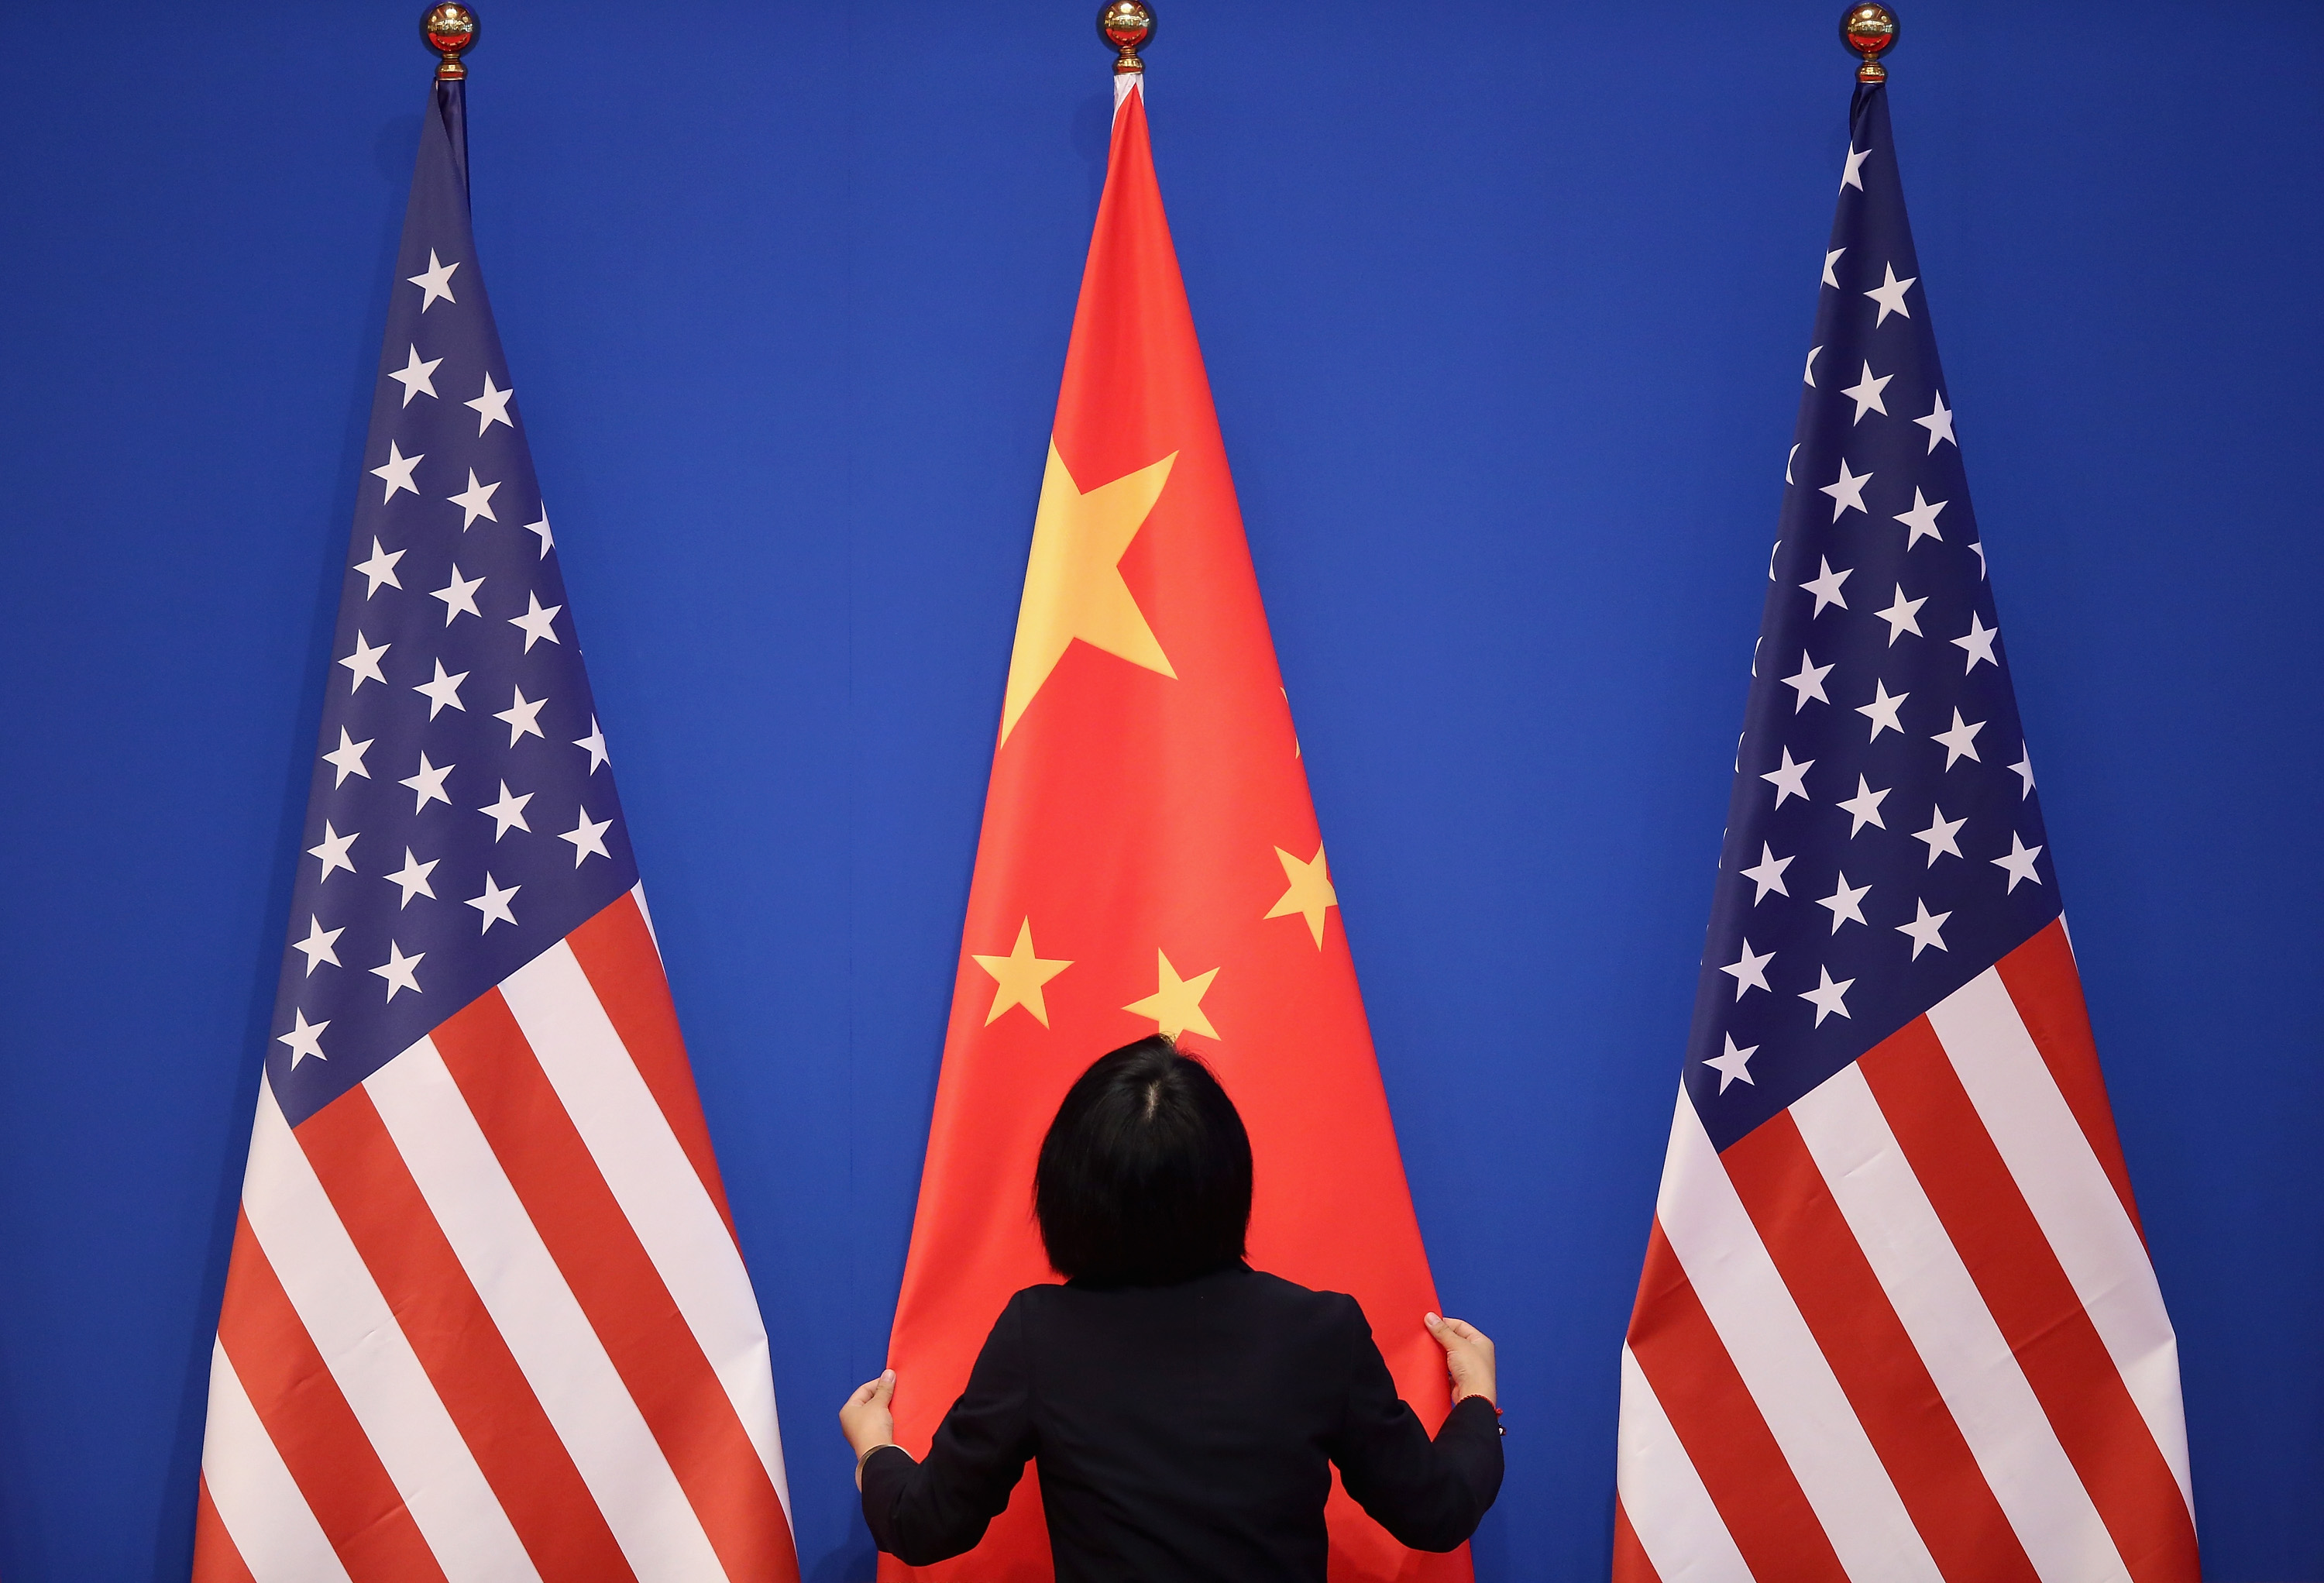 The 6th Round Of The China-U.S. Strategic And Economic Dialogue & 5th Round Of The China-US High Level Consultation On People-To-People Exchange